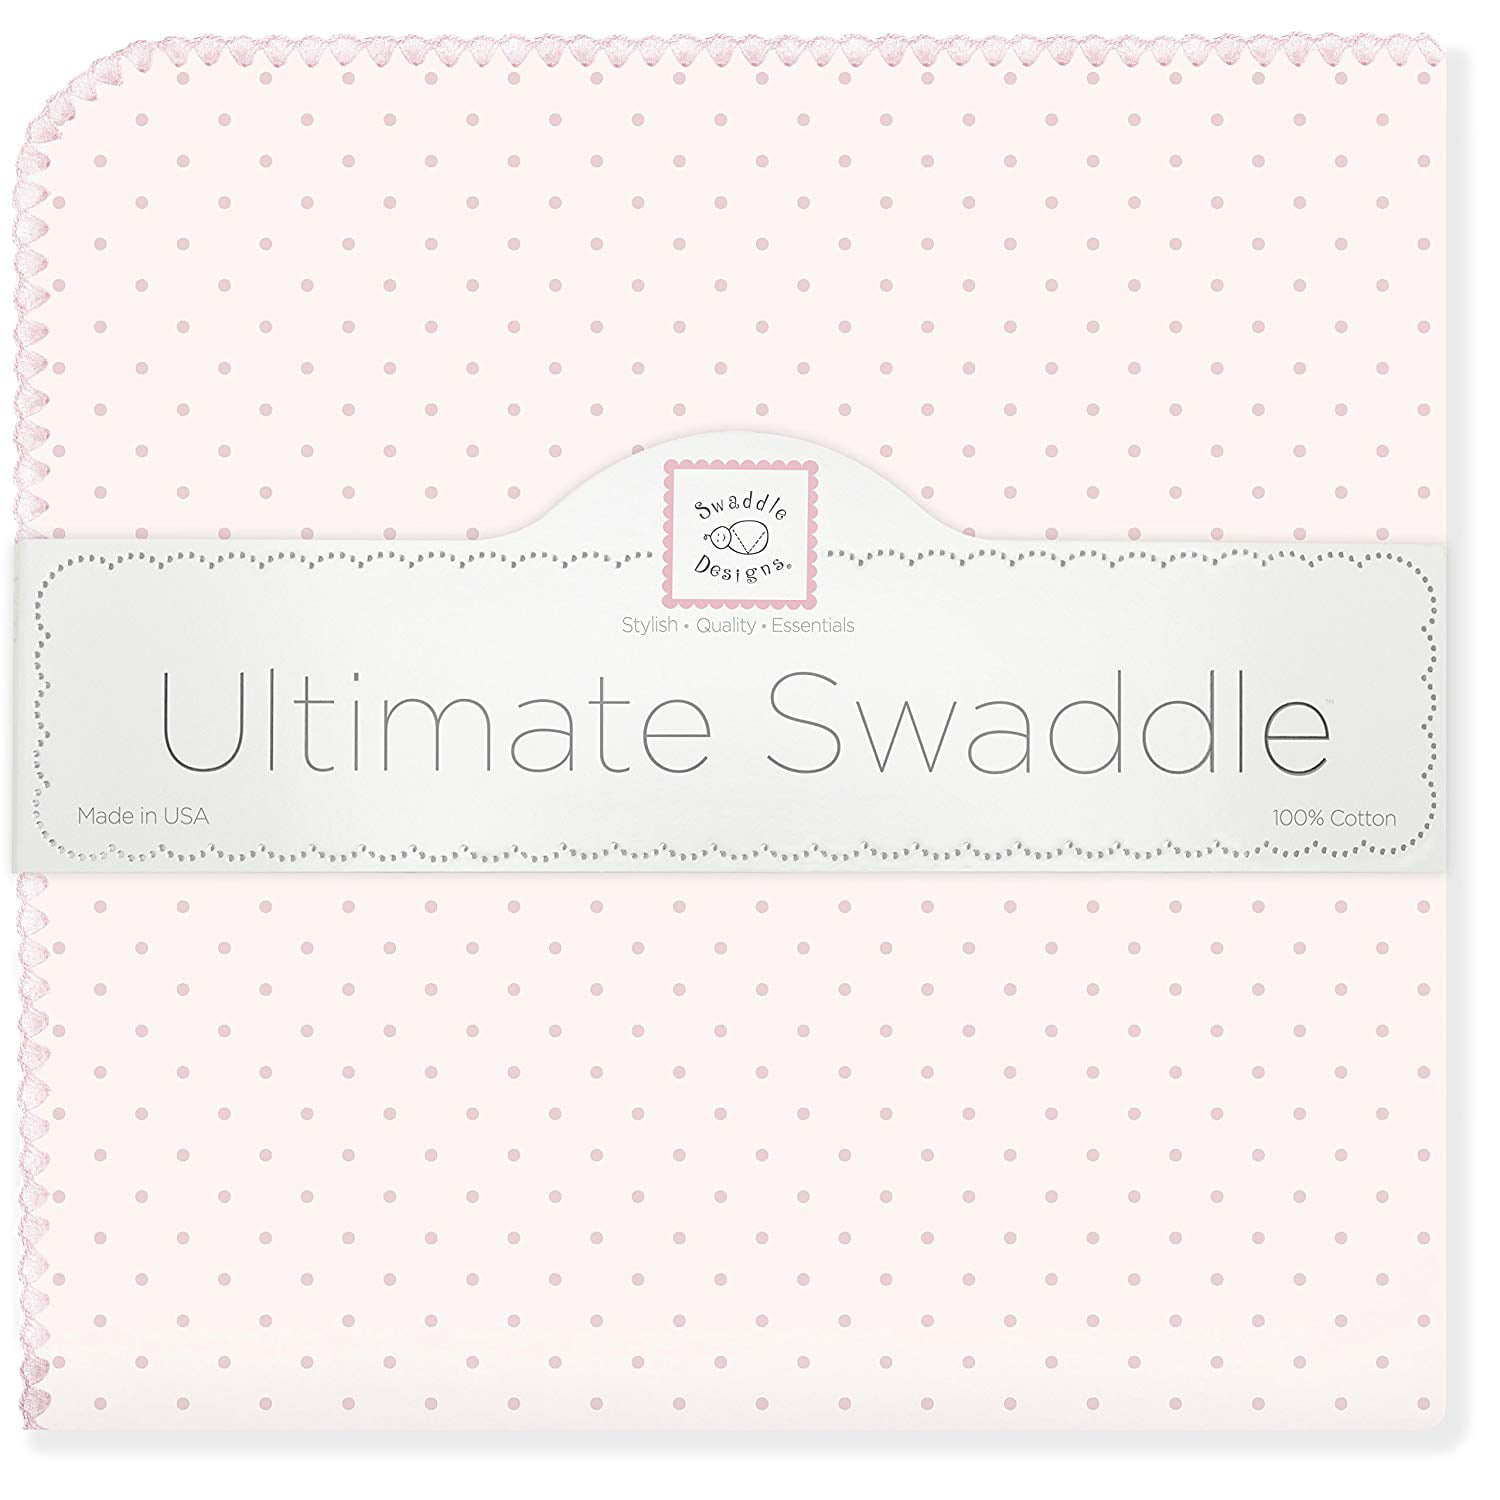 Moms Choice Award Winner SwaddleDesigns Ultimate Swaddle X-Large Receiving Blanket Pastel Polka Dots on Pastel Blue Made in USA Premium Cotton Flannel 